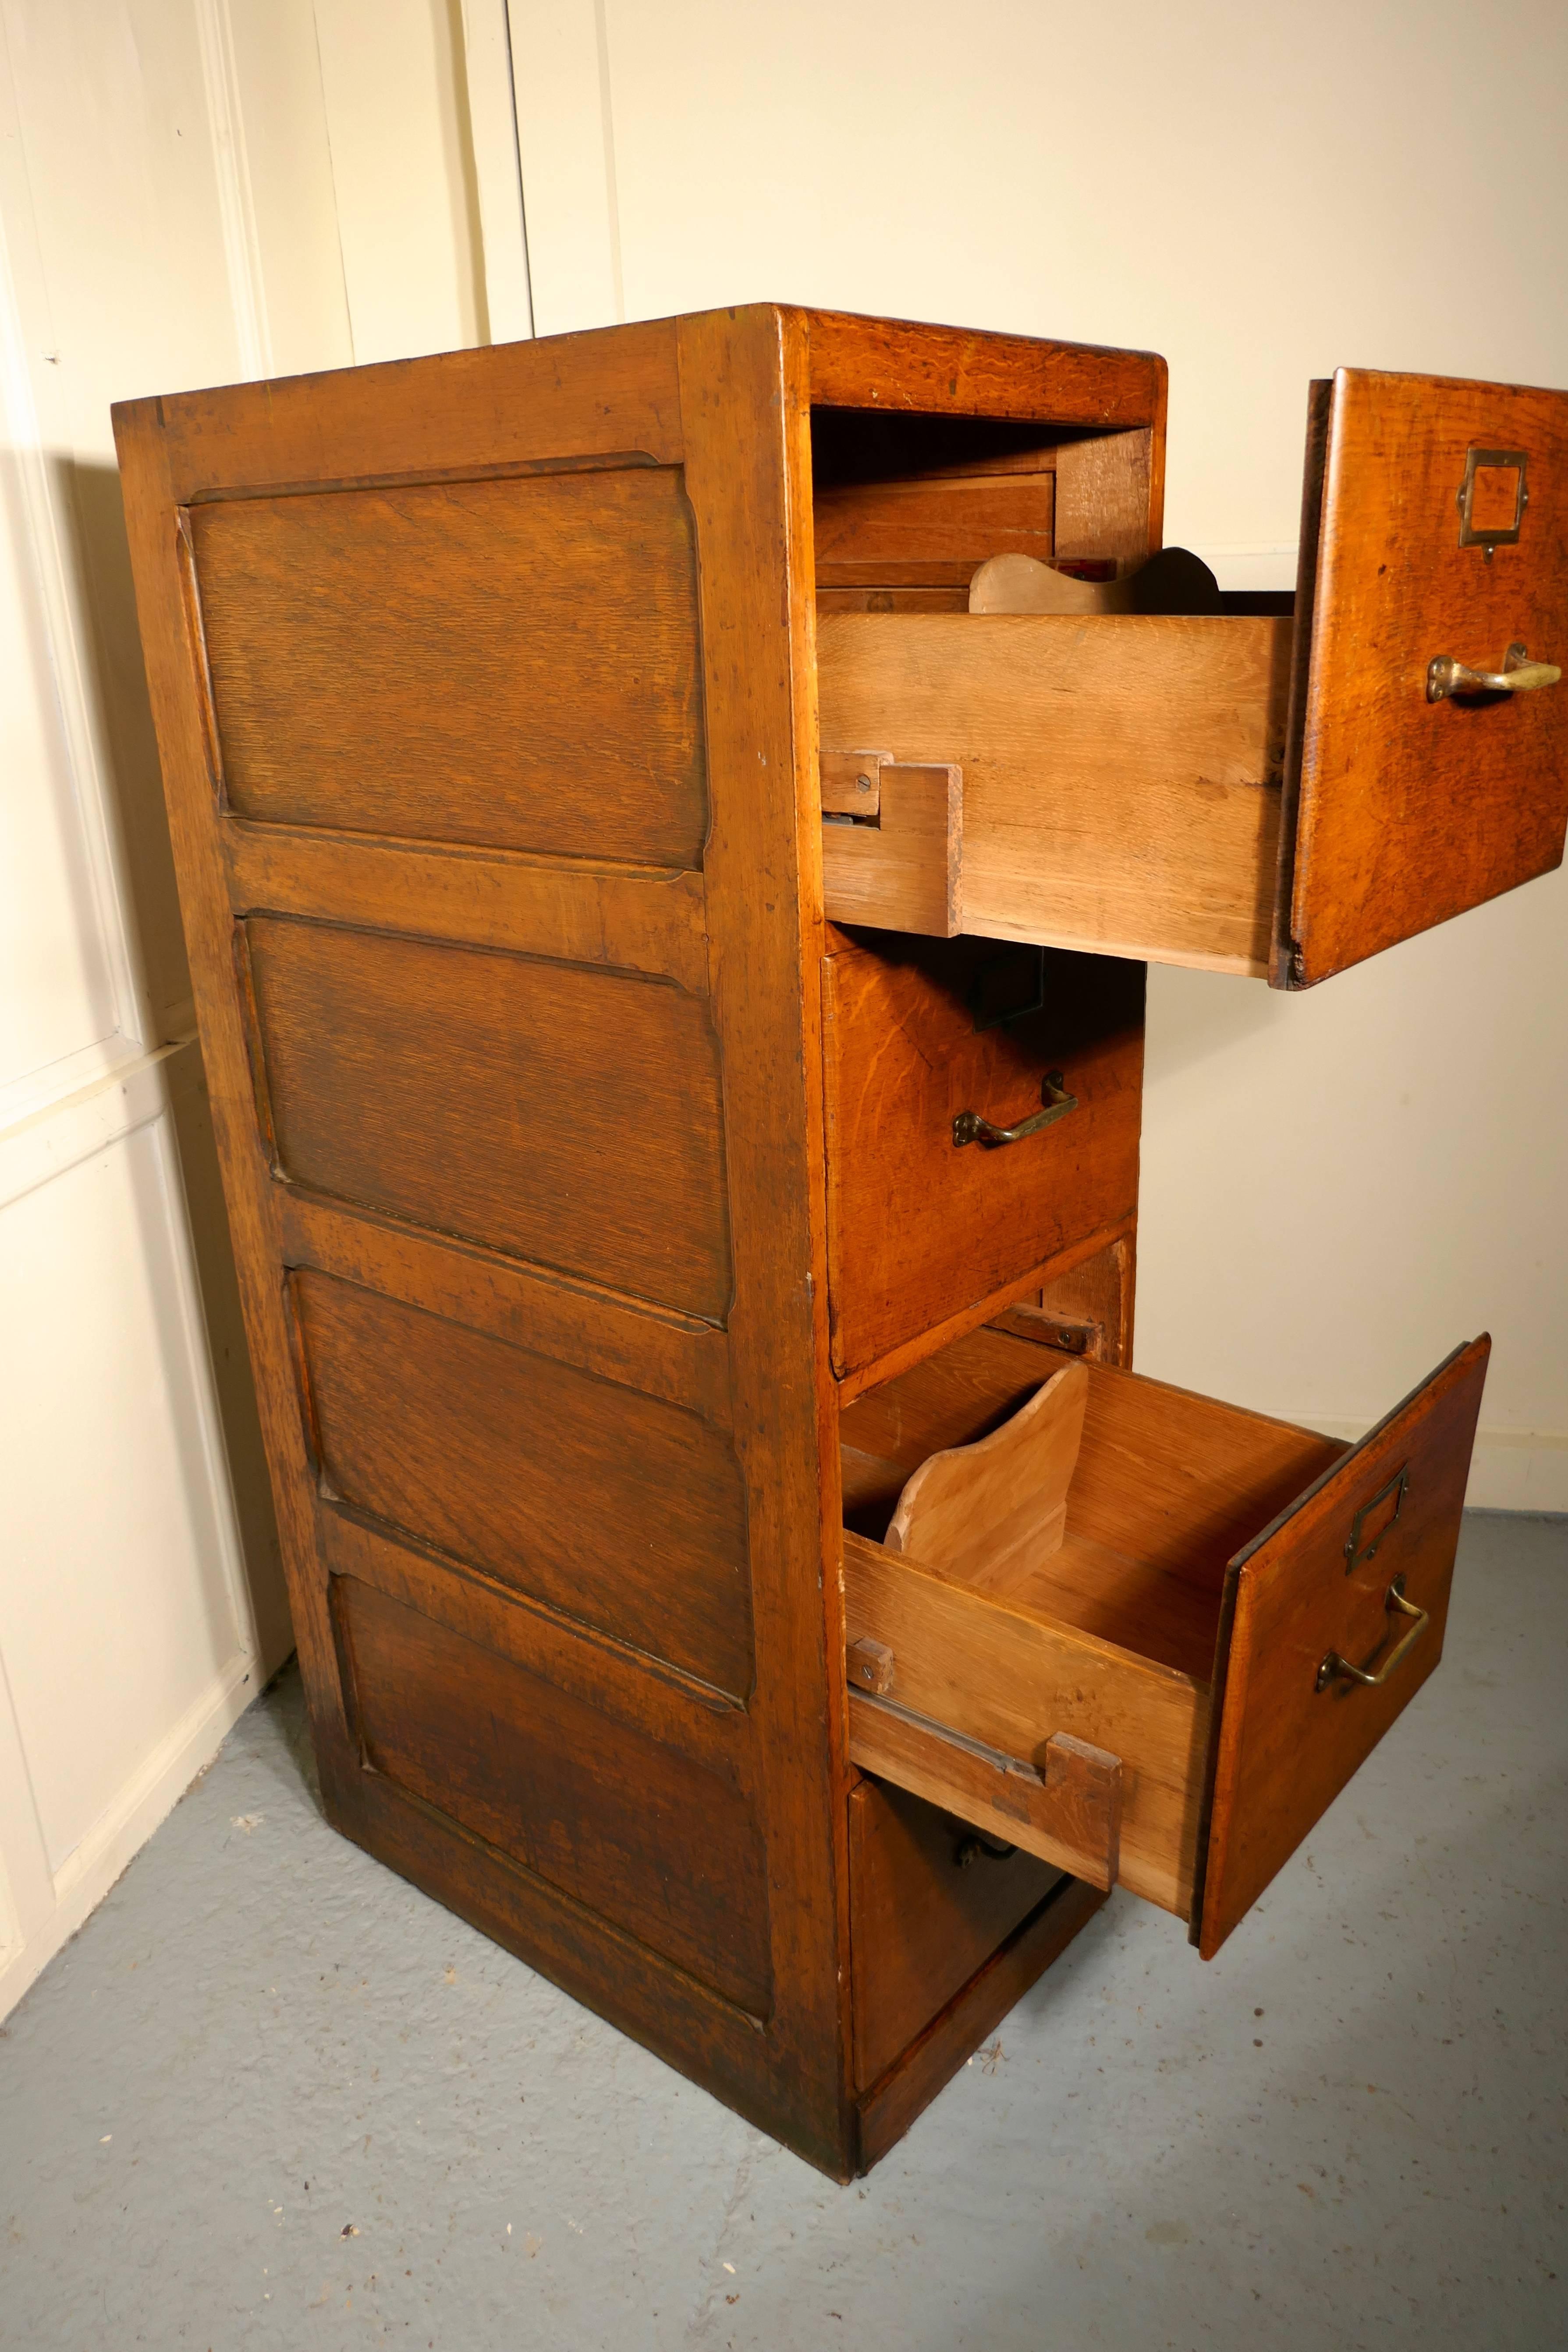 Large Edwardian four drawer oak filing cabinet

This is an absolute must for every home office or study, the cabinet has four deep and roomy drawers, they all glide smoothly and have brass handles and card holders on the front , they will